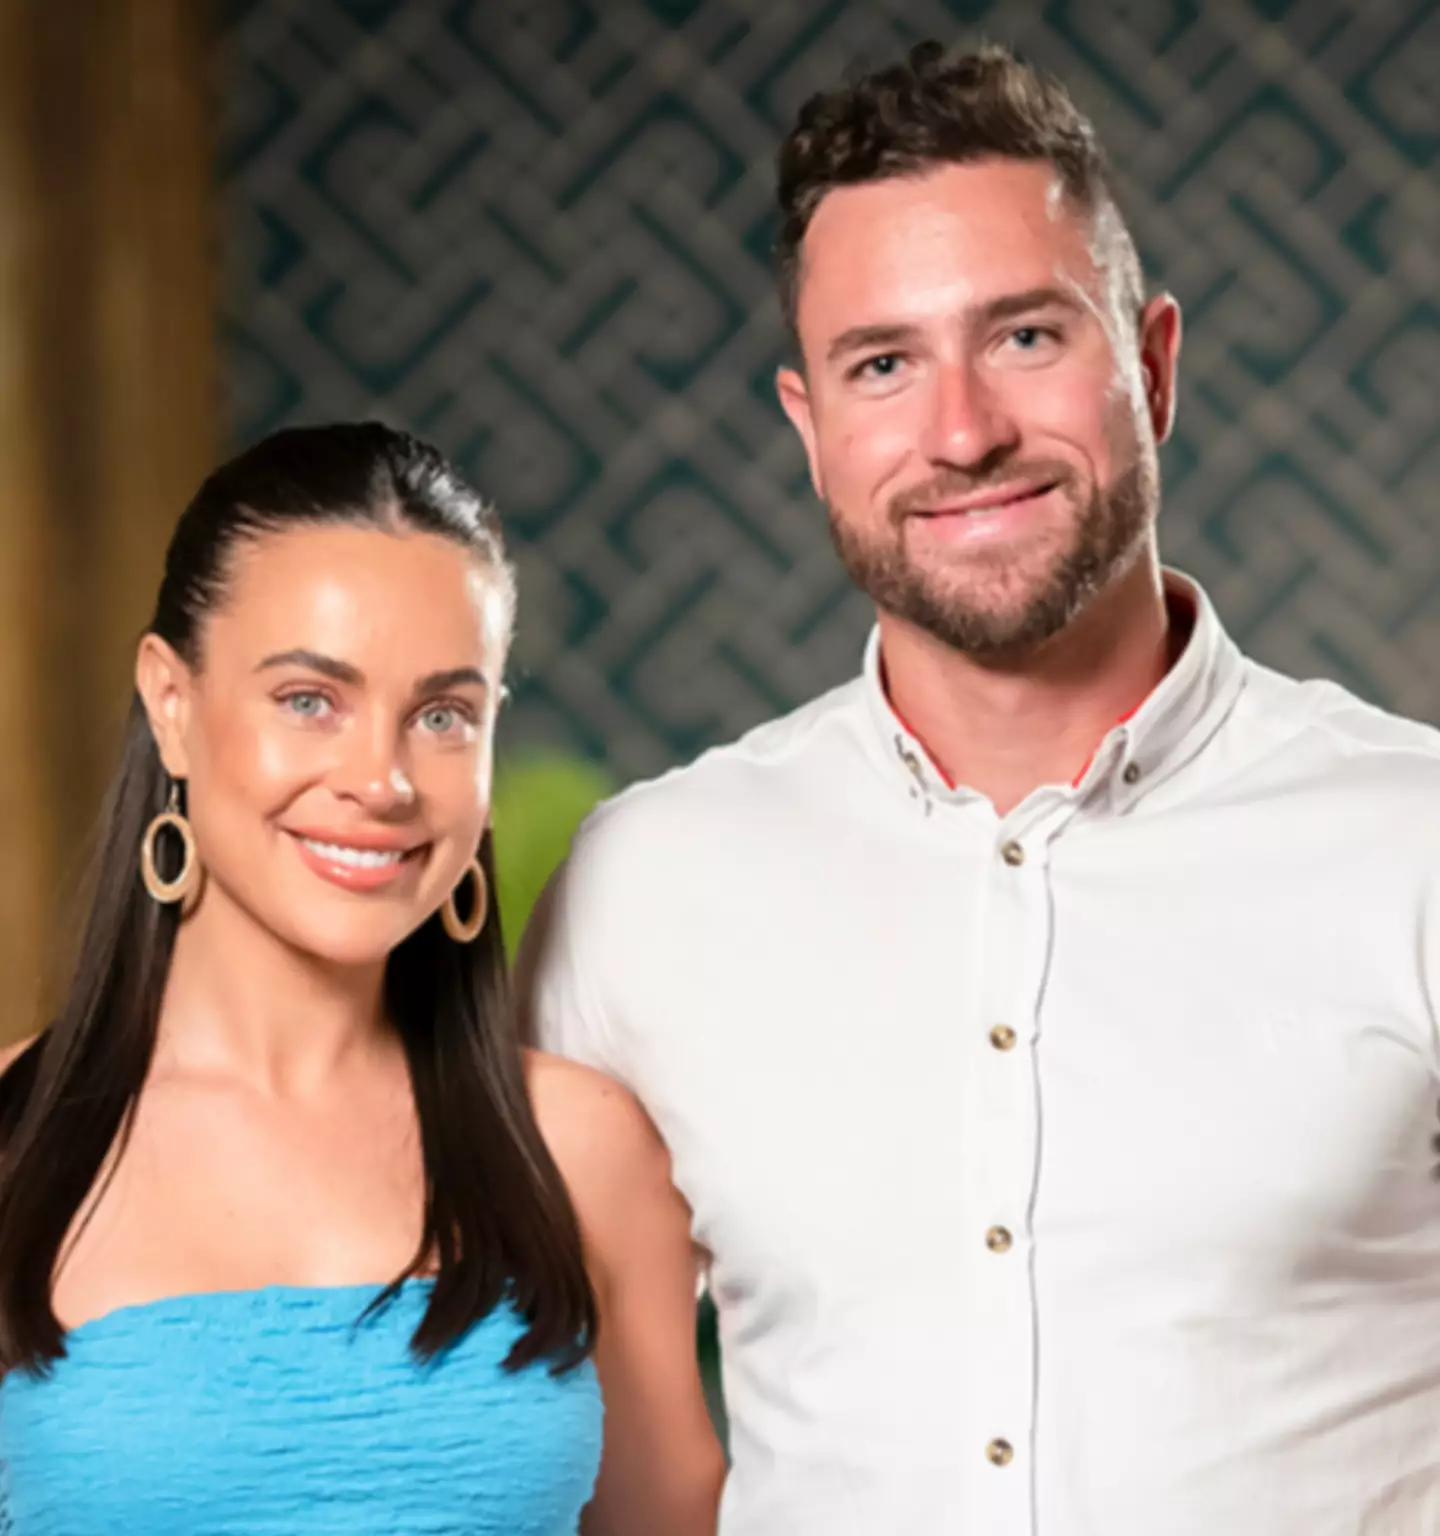 Harrison made the headlines on MAFS from the get-go with his partner.